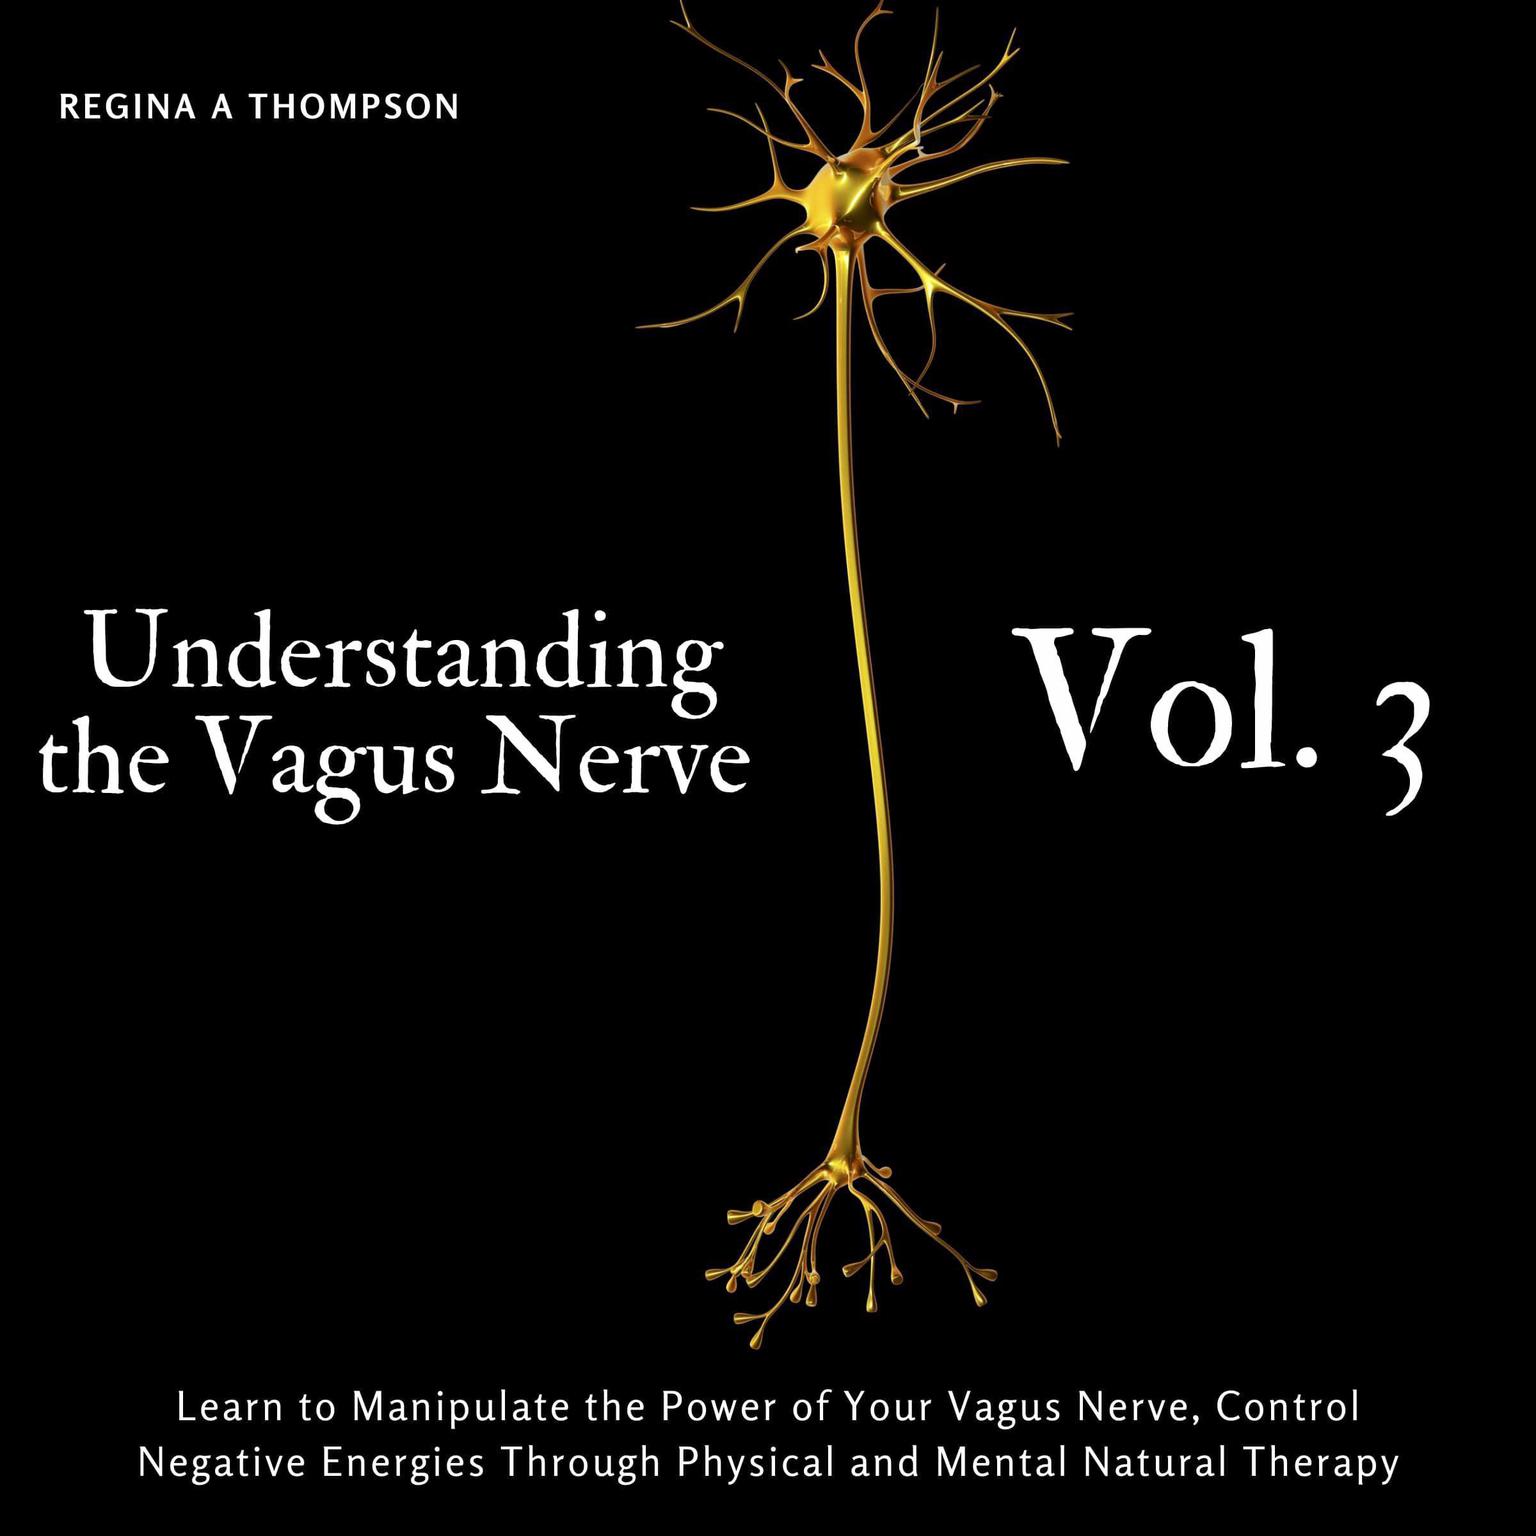 Understanding the Vagus Nerve - Vol. 3 - Learn to Manipulate the Power of Your Vagus Nerve, Control Negative Energies Through Physical and Mental Natural Therapy Audiobook, by Regina A Thompson